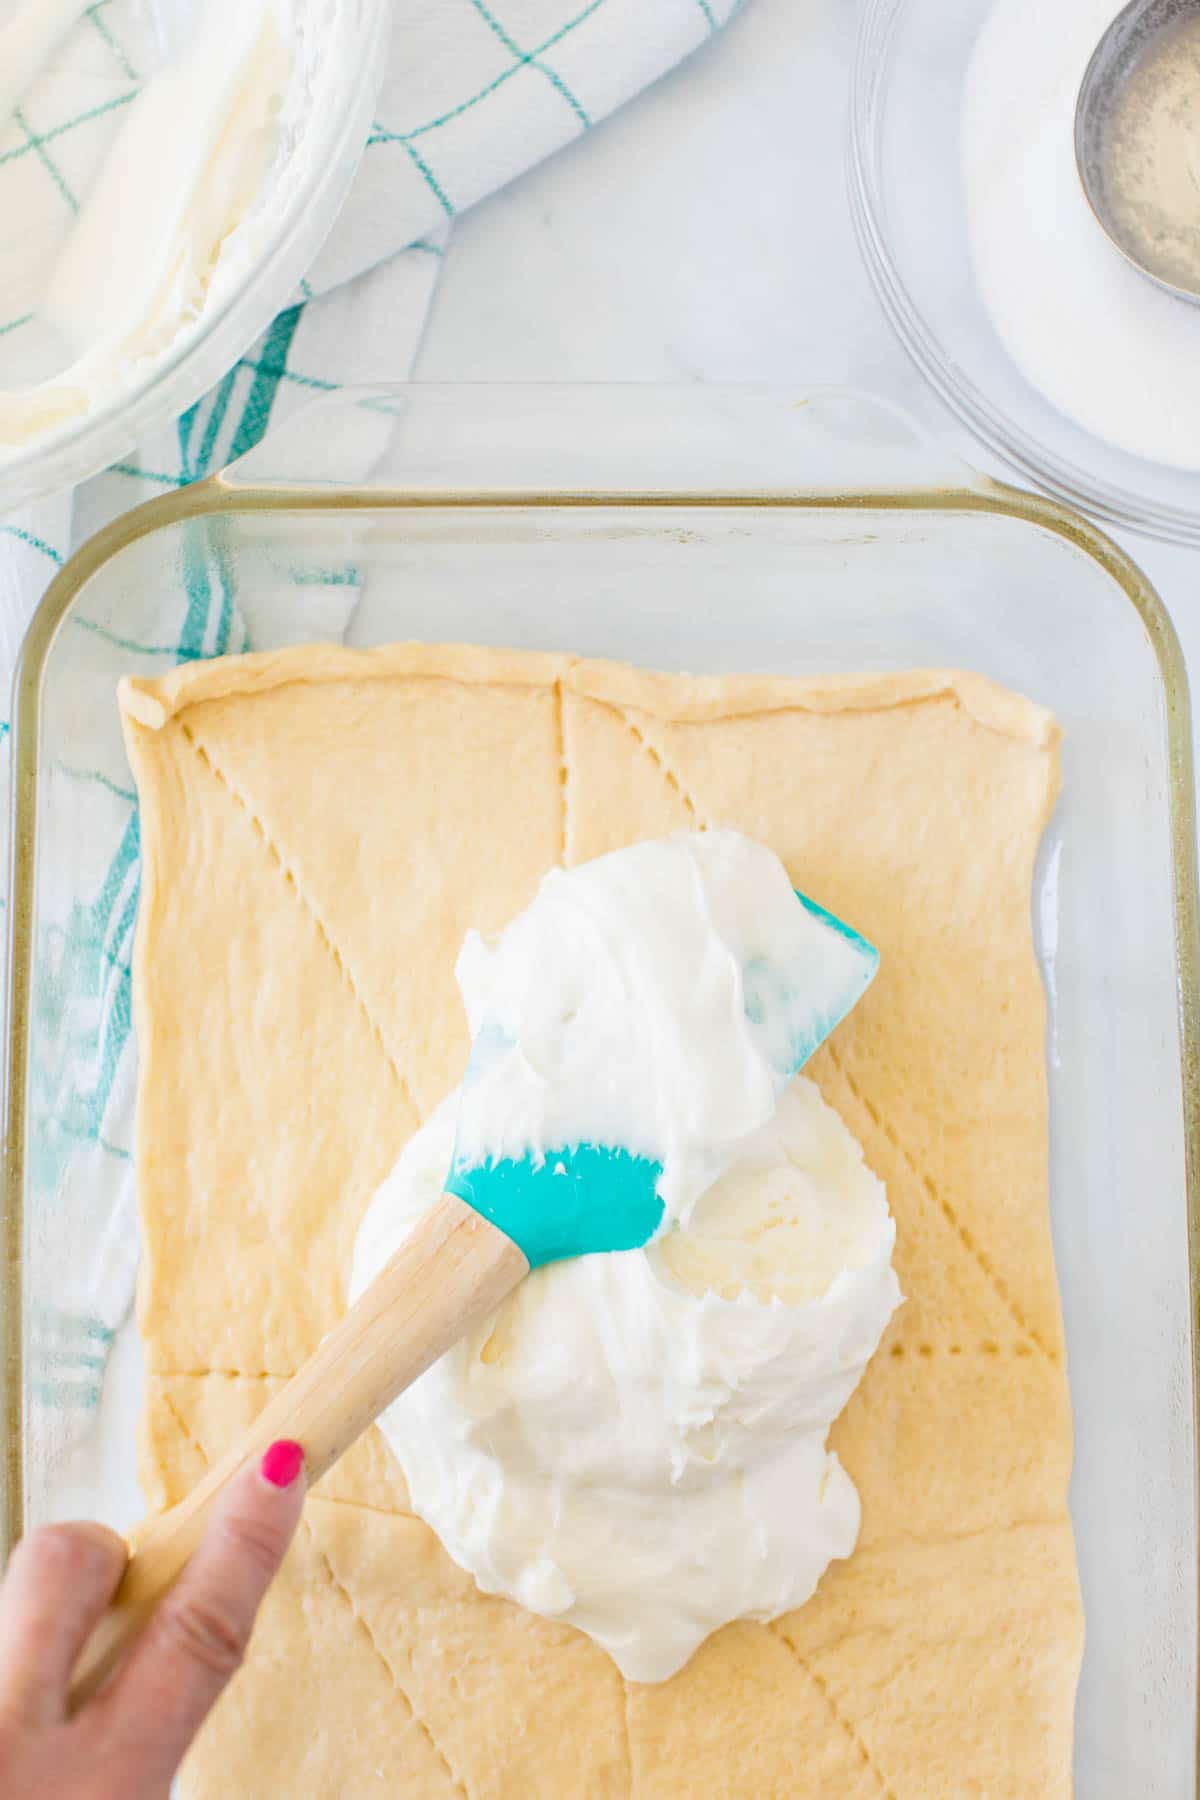 Spatula adding cream cheese mixture to crescent rolls in a baking dish